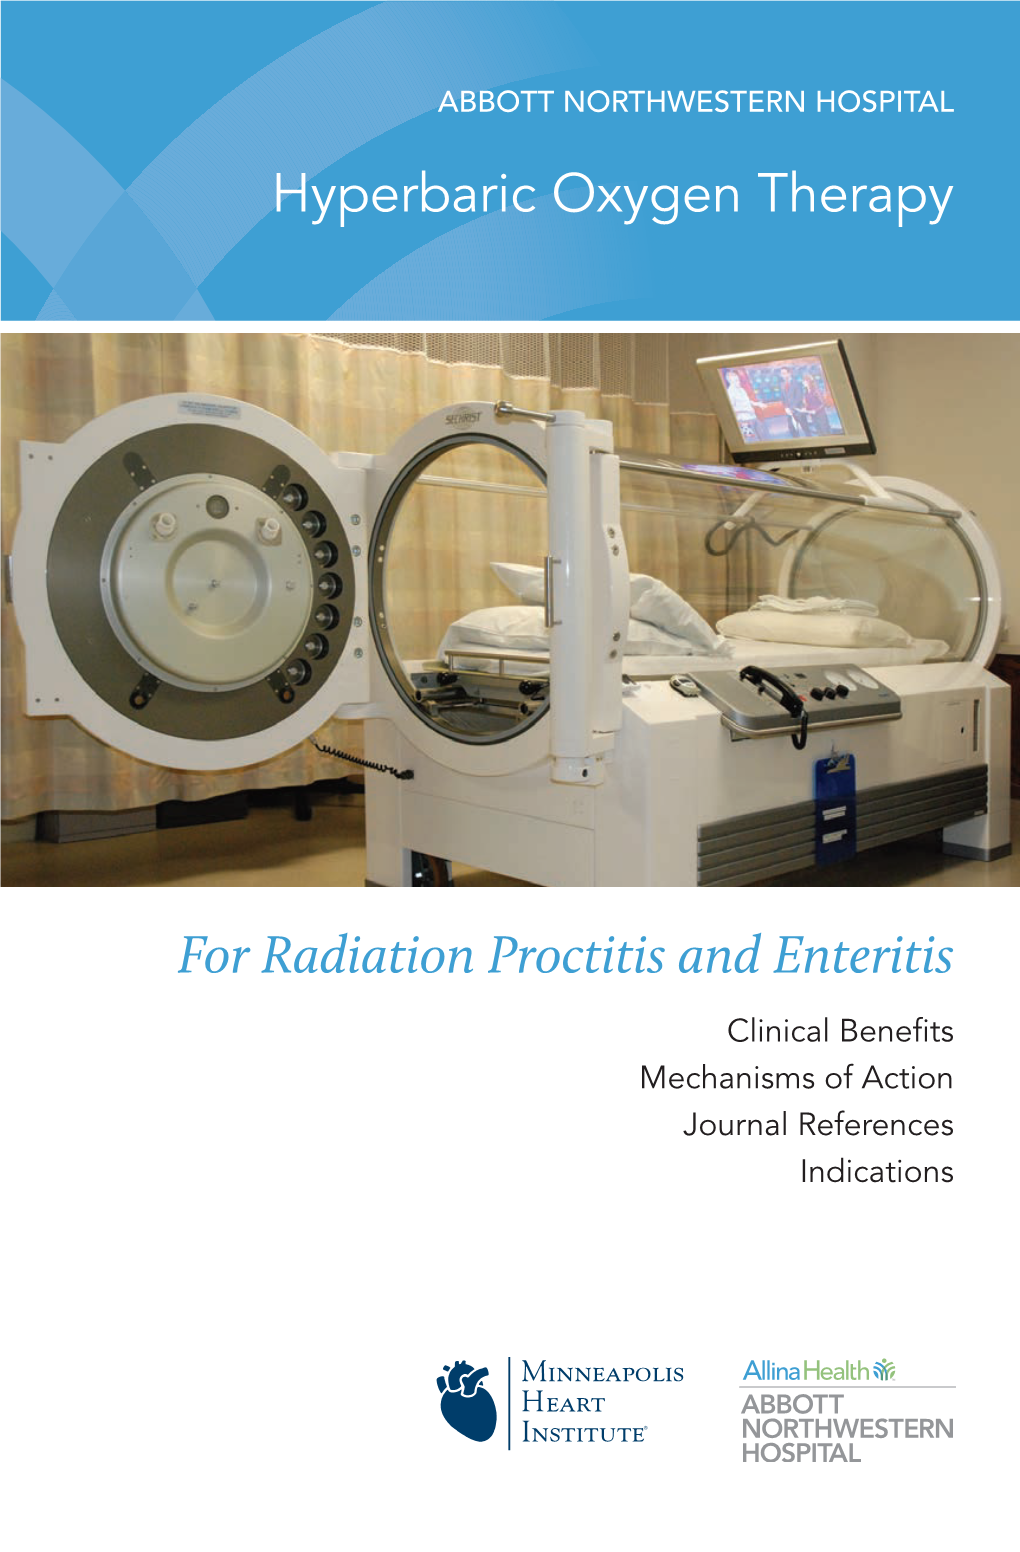 For Radiation Proctitis and Enteritis Hyperbaric Oxygen Therapy